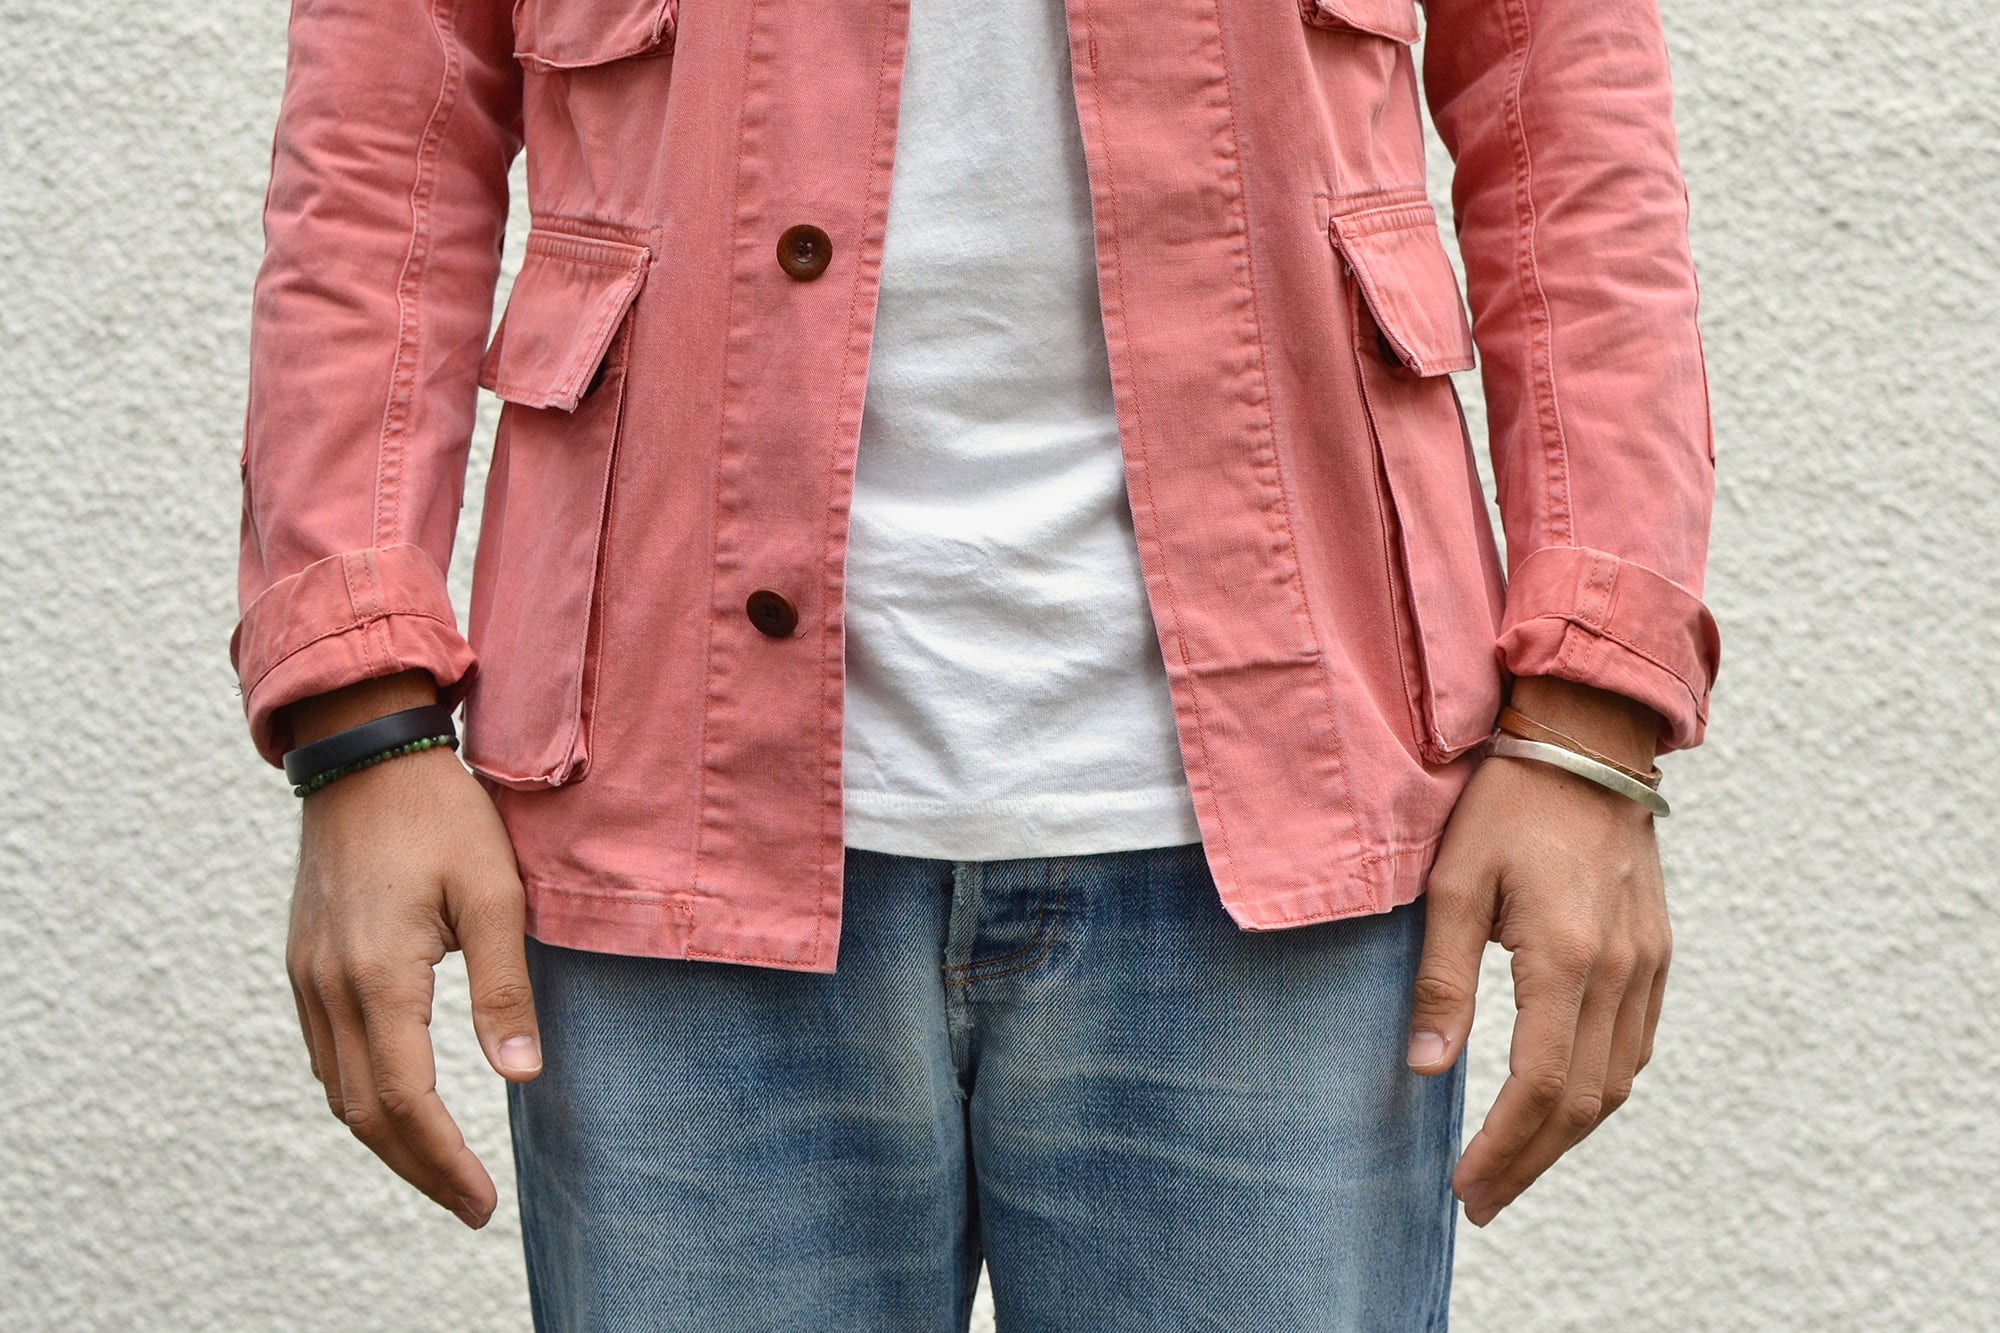 Visvim kilgore jacket salon pink SS 2012 and white tee with apc butler jeans